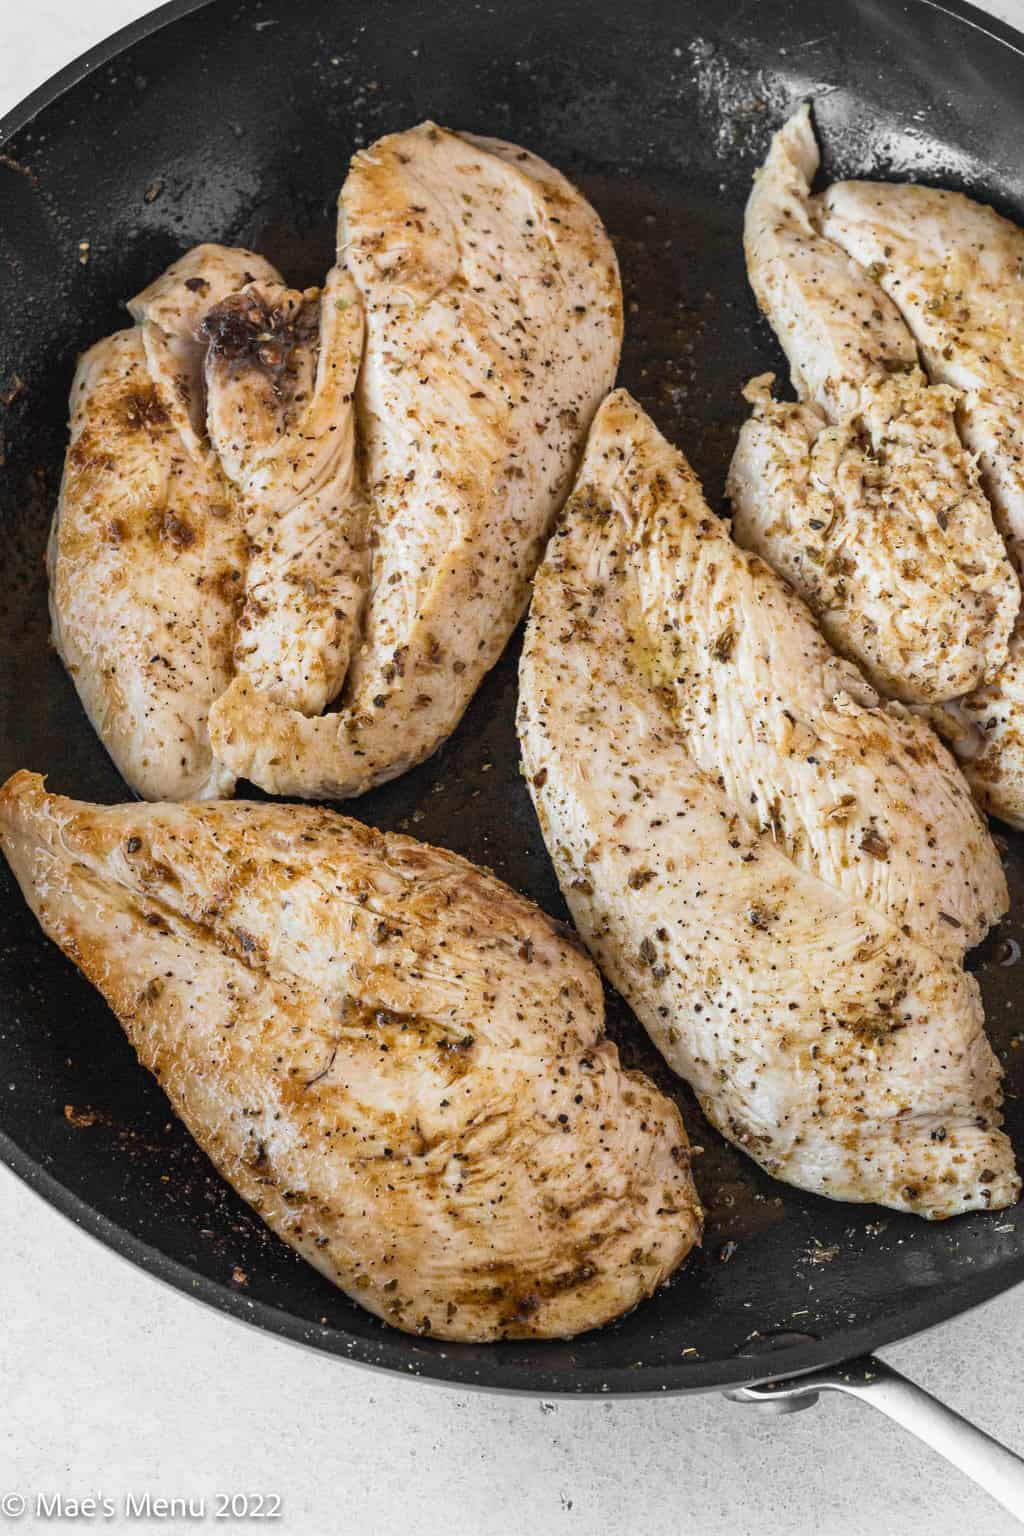 Chicken breasts sauteed in a pan.